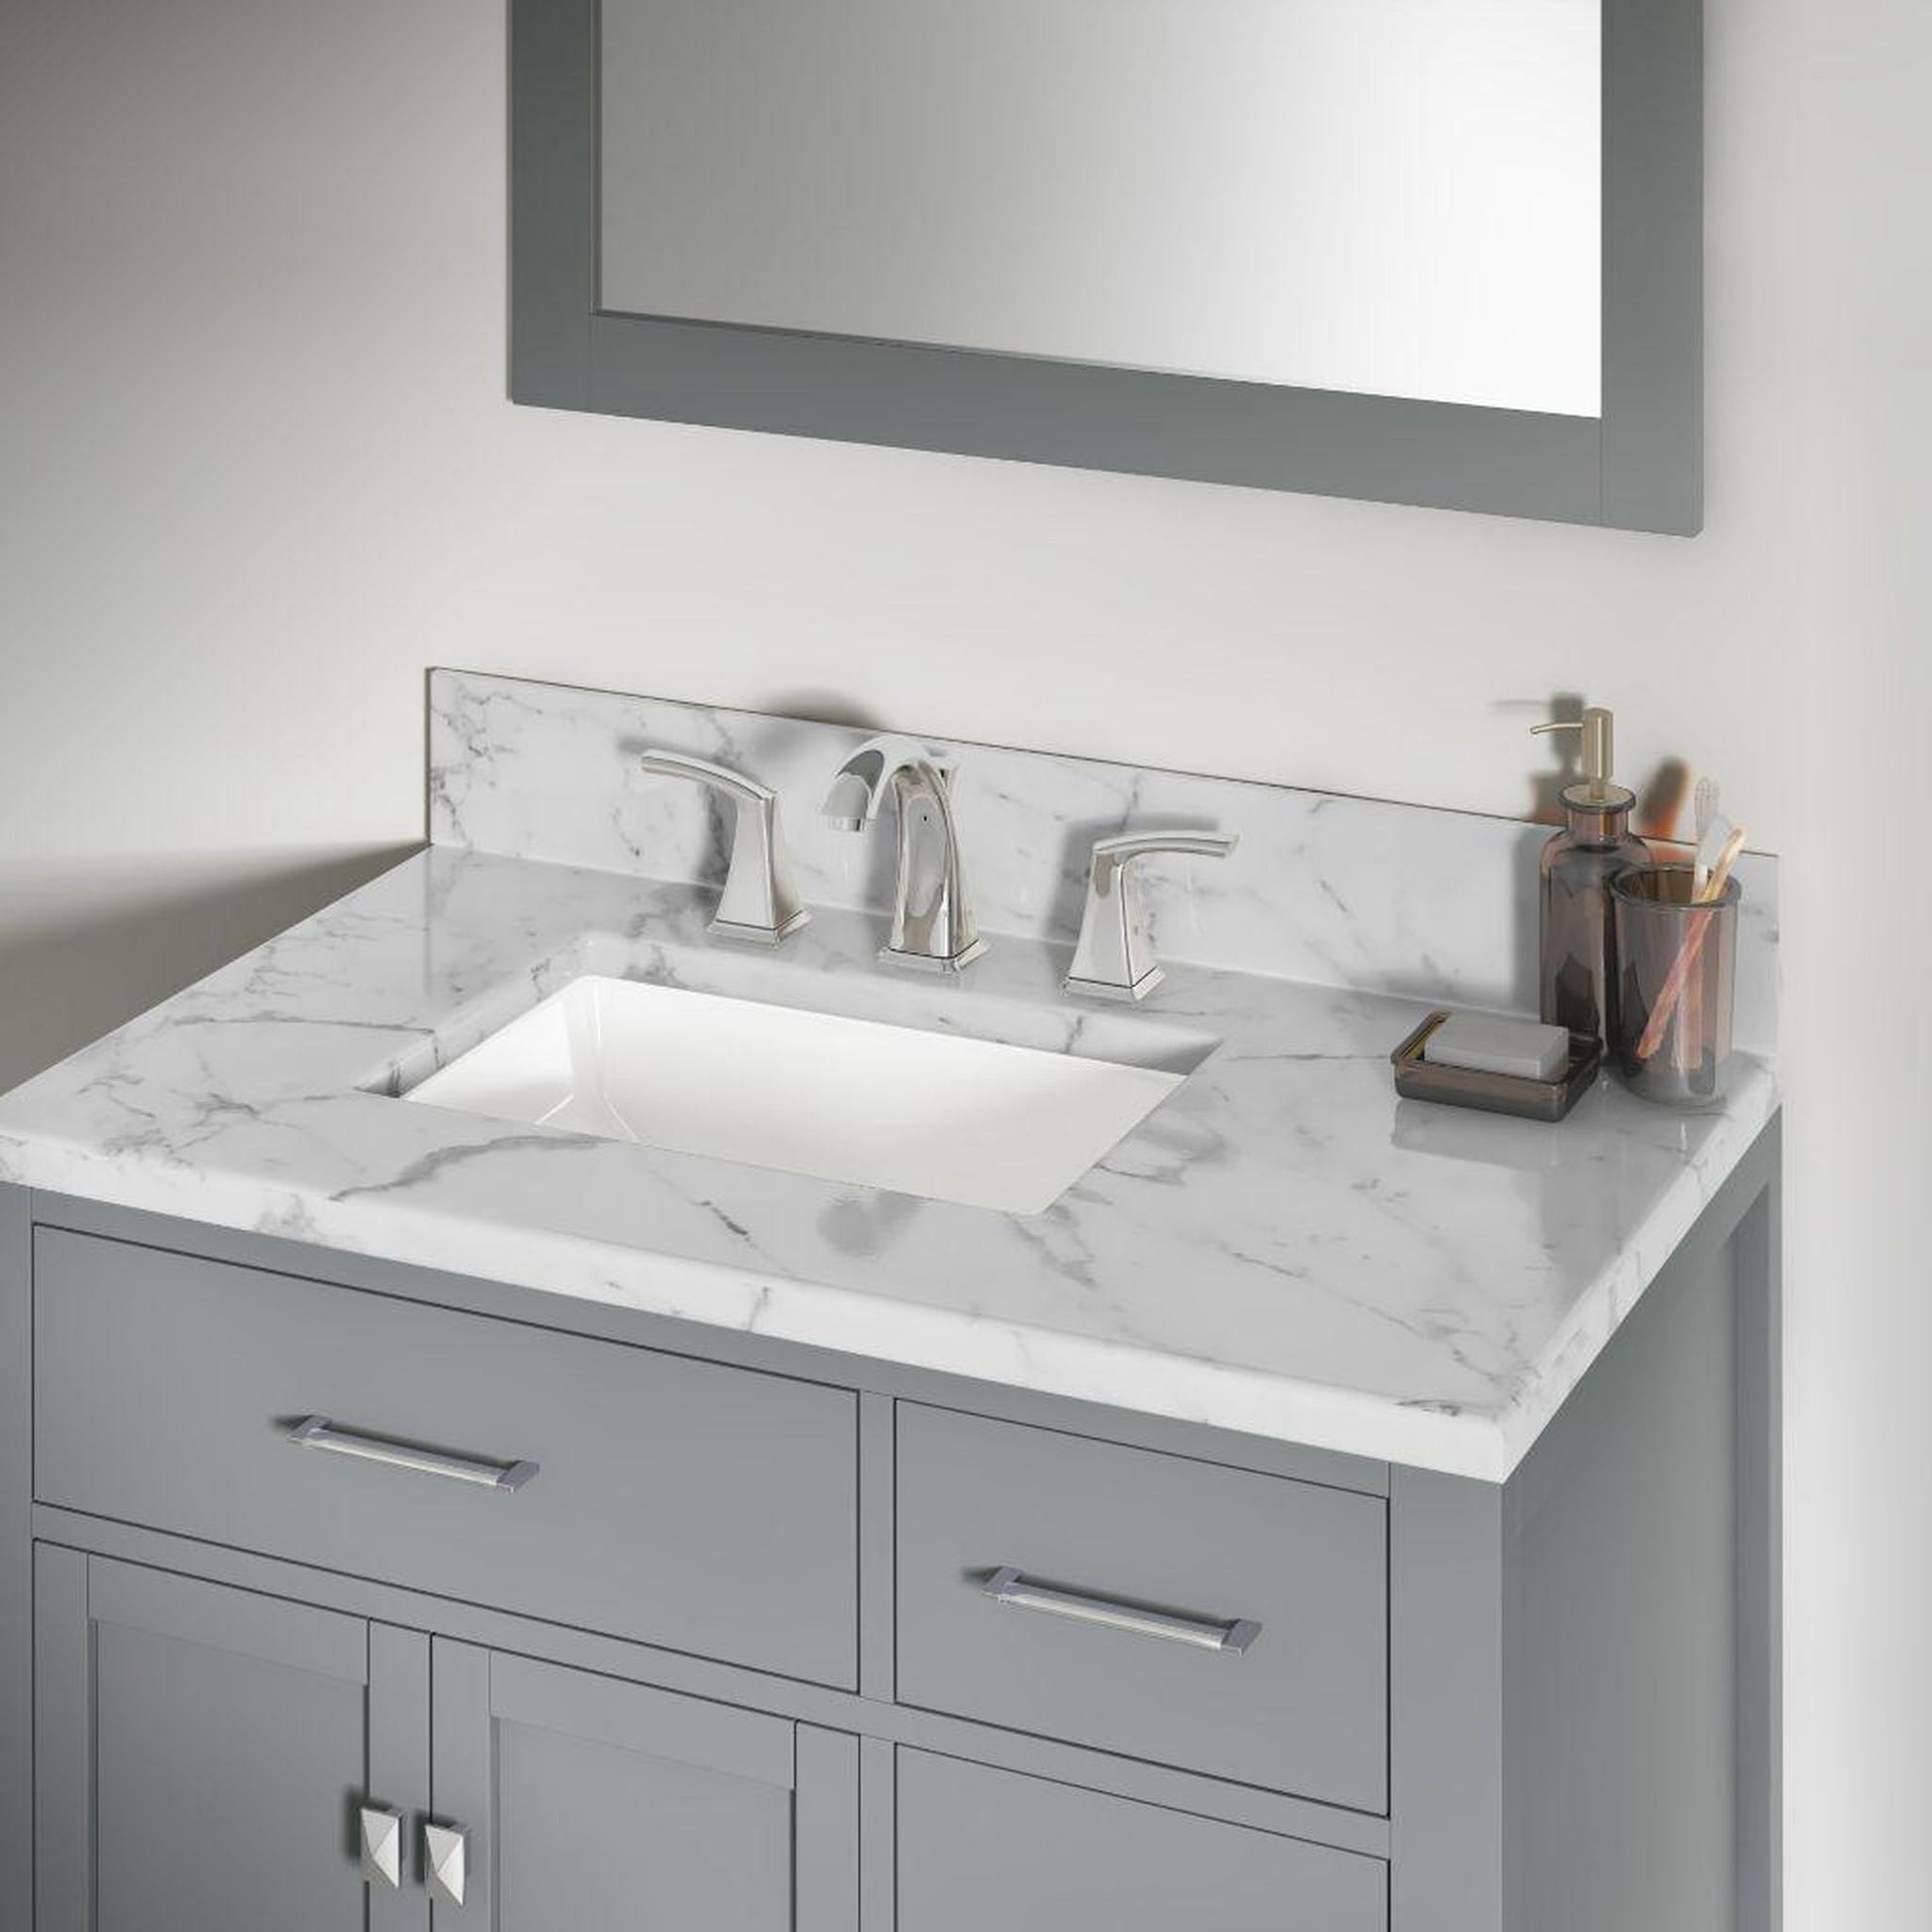 Allora USA 20.25" X 15" White Vitreous China Rectangle Porcelain Undermount Sink with Overflow